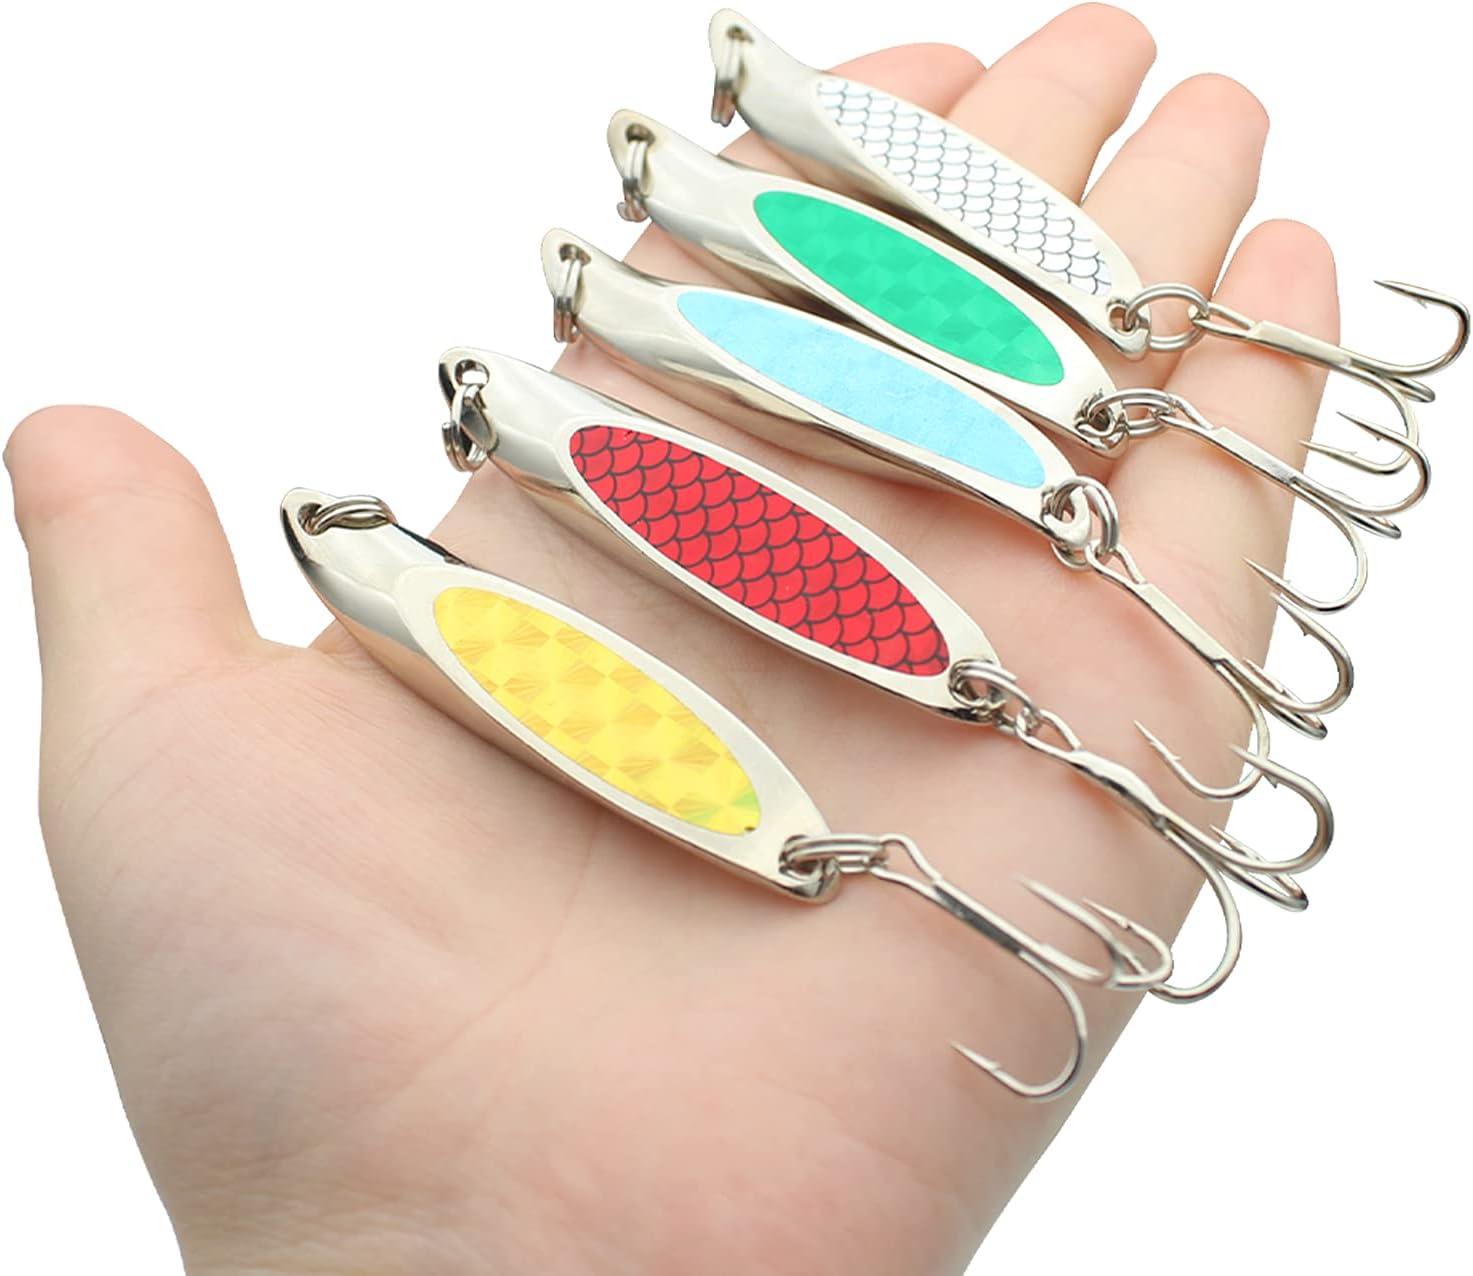  HUIOP Fishing Spoon Lures, 16pcs Fishing Spoons Lures Metal  Baits Set forCasting Spinner Fishing Bait with Storage Bag Case : Sports &  Outdoors